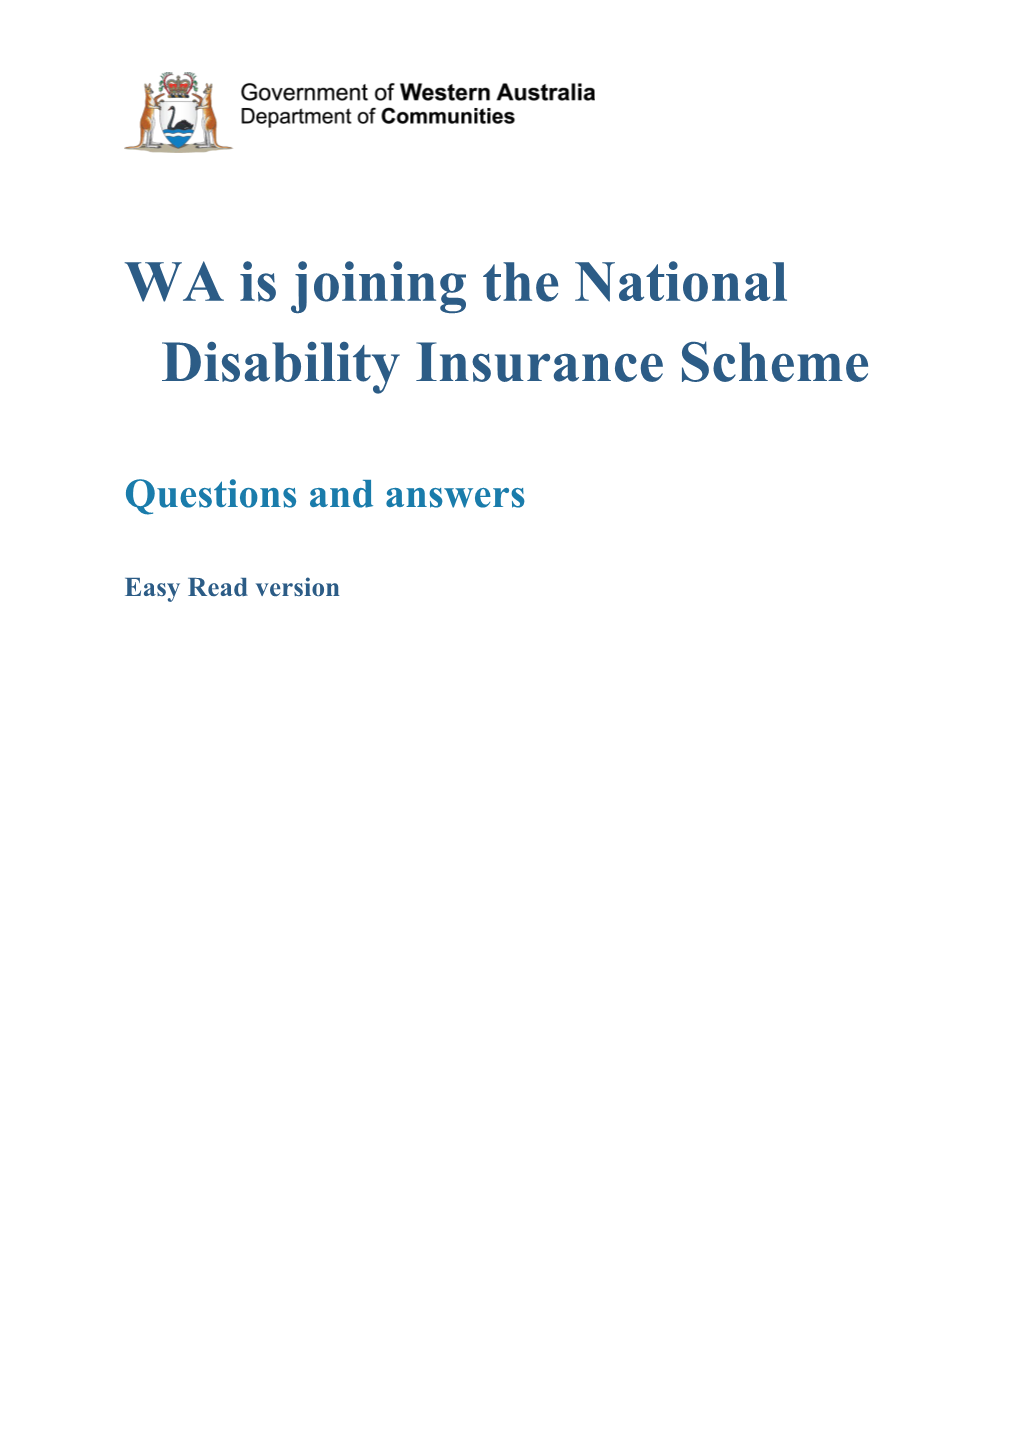 WA Is Joining the National Disability Insurance Scheme